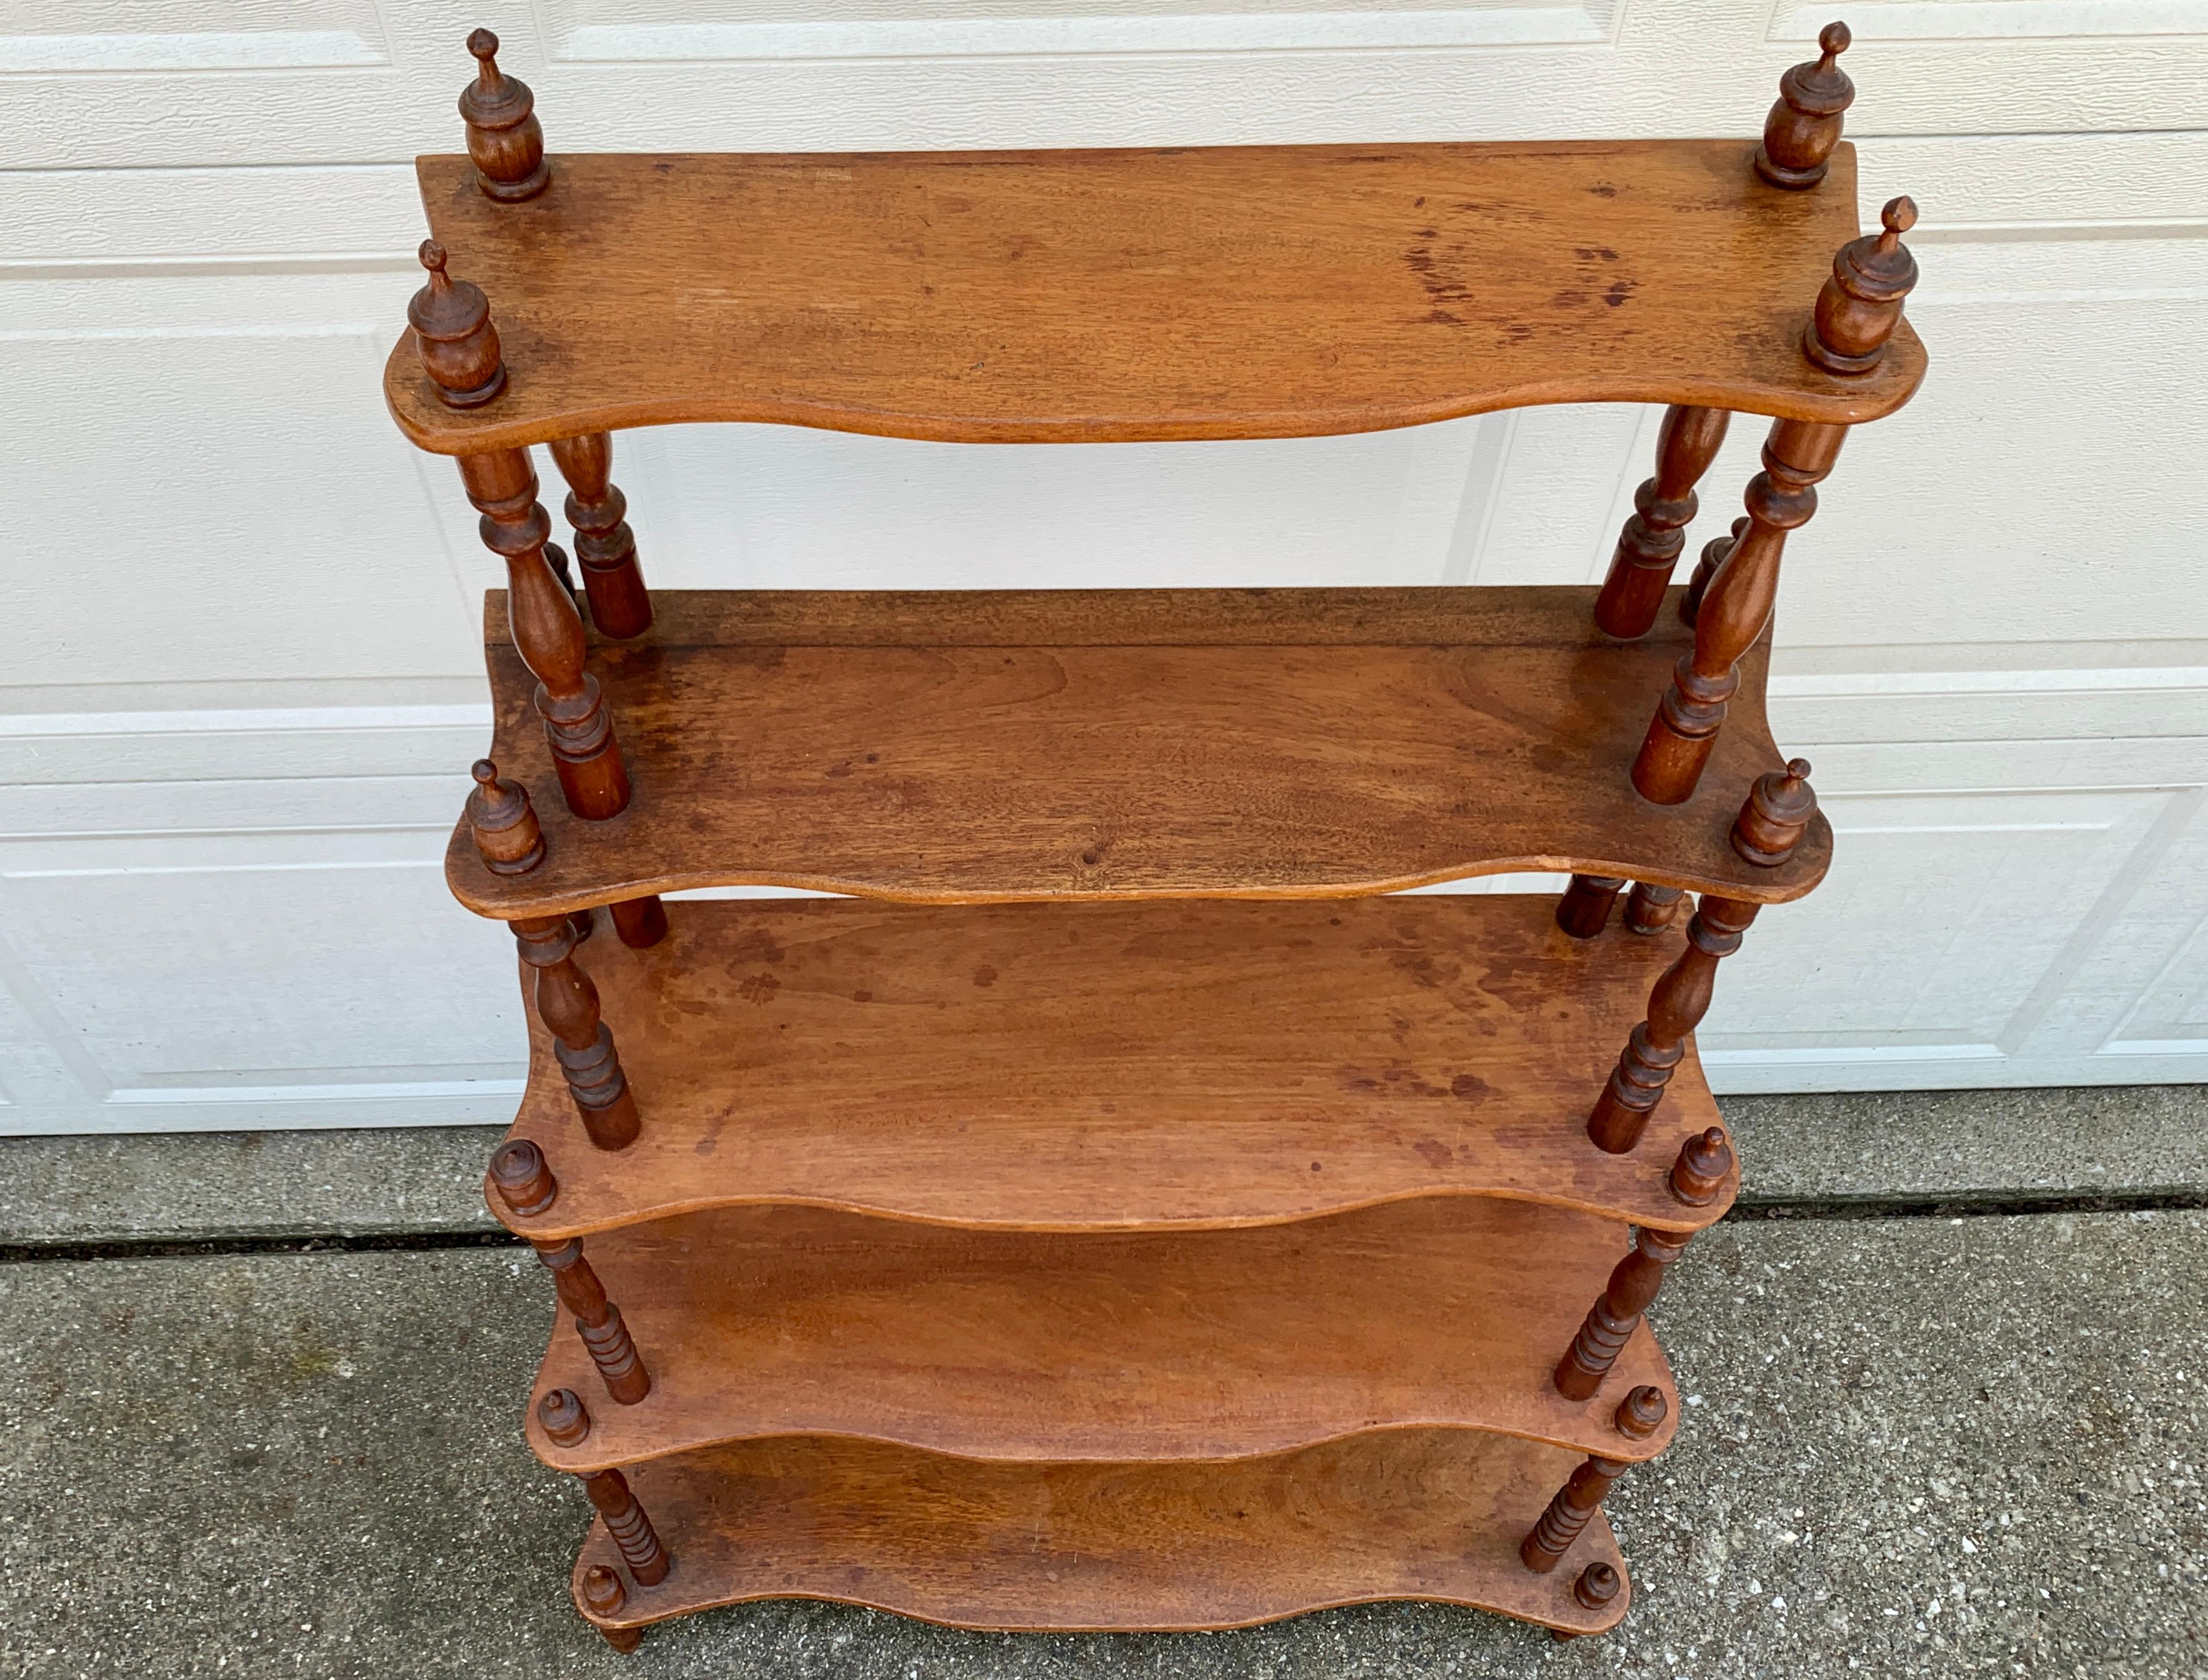 Antique American Victorian Cherry Wood Etagere or Bookshelf For Sale 2